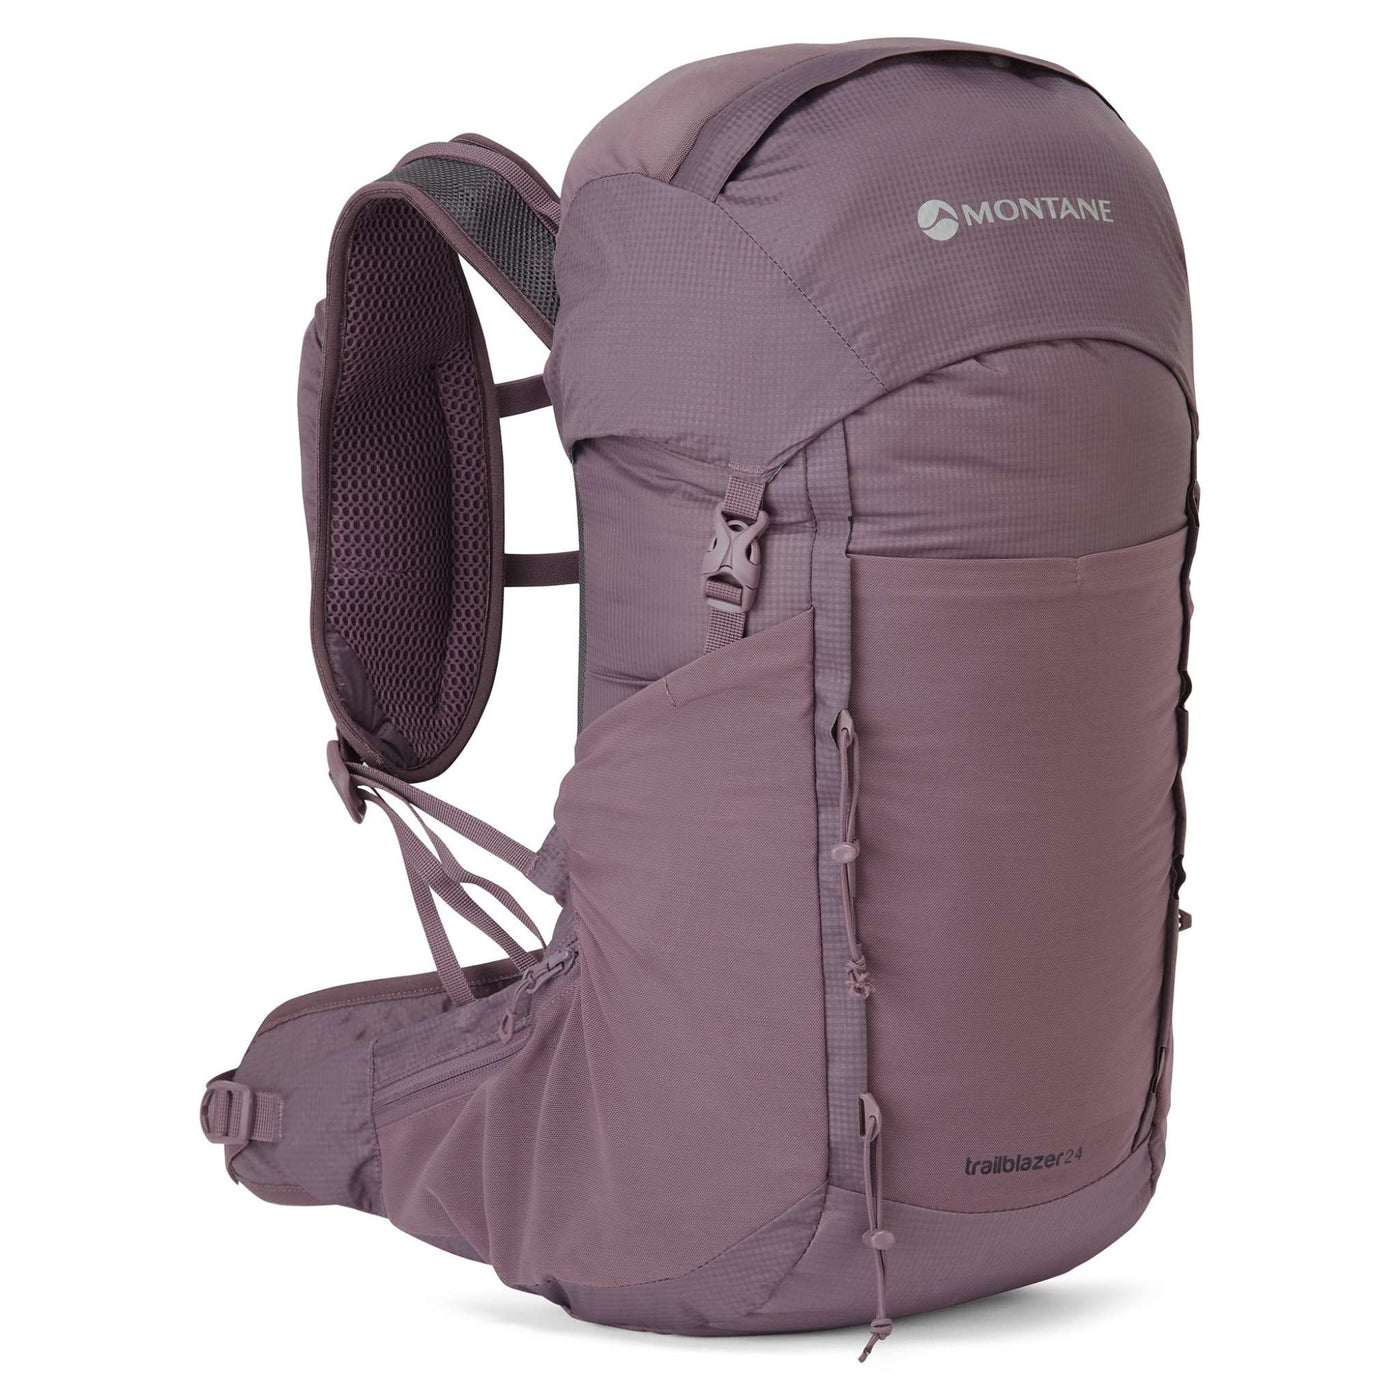 Montane Trailblazer 24 - Womens | Trail Running and Fast Packing Pack | Further Faster Christchurch NZ | #moonscape